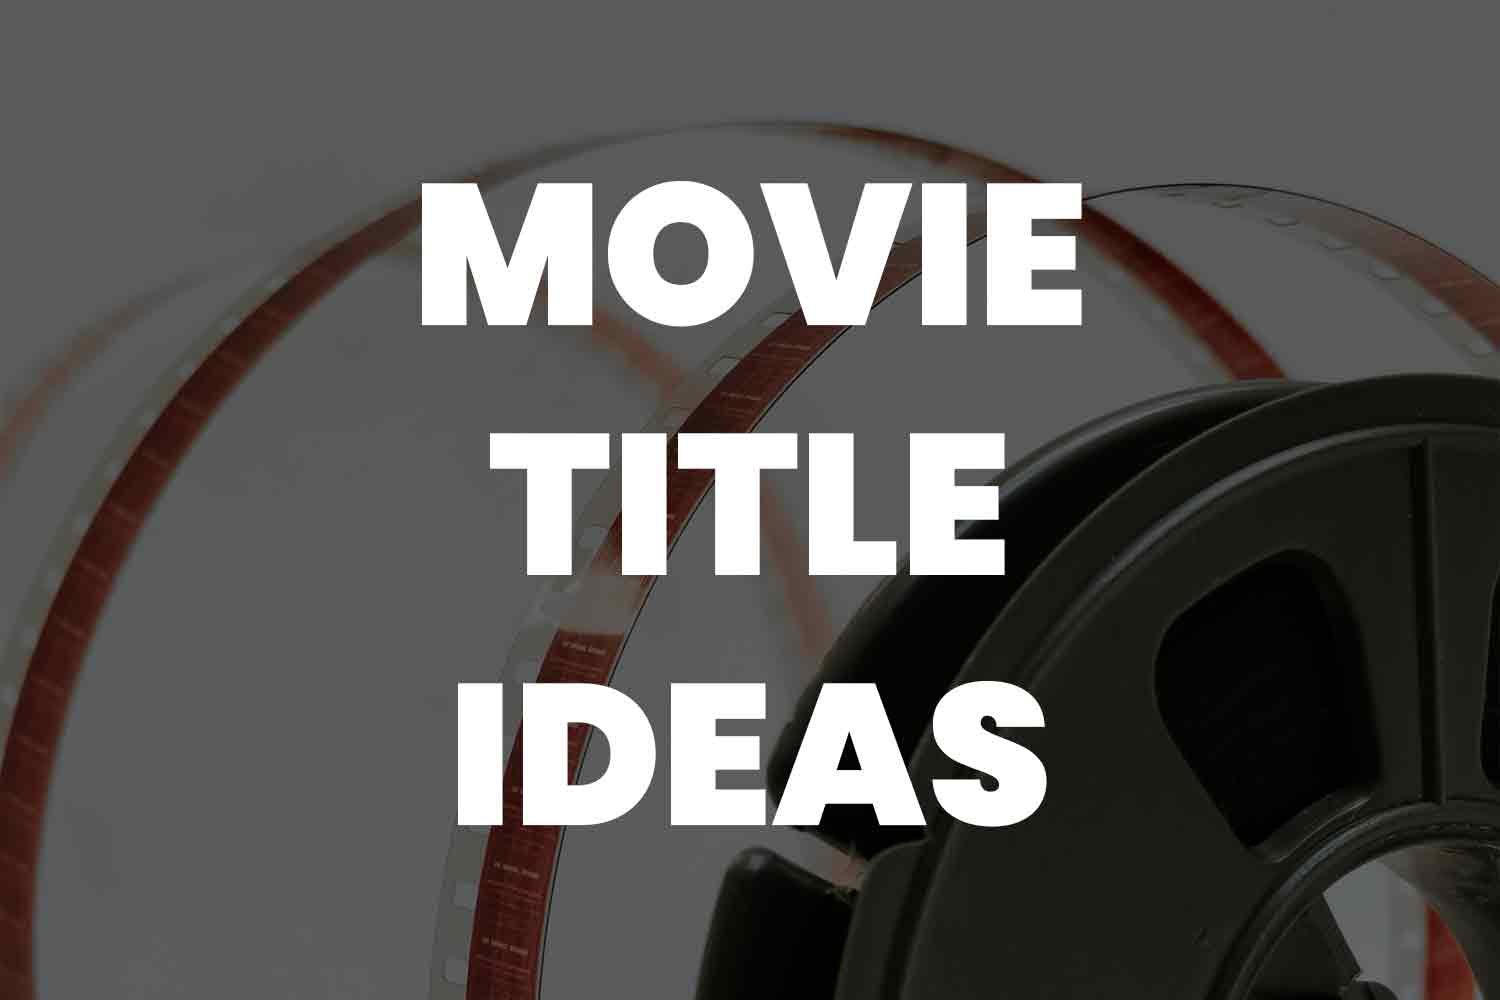 510 Movie Title Ideas to Hook Your Audience